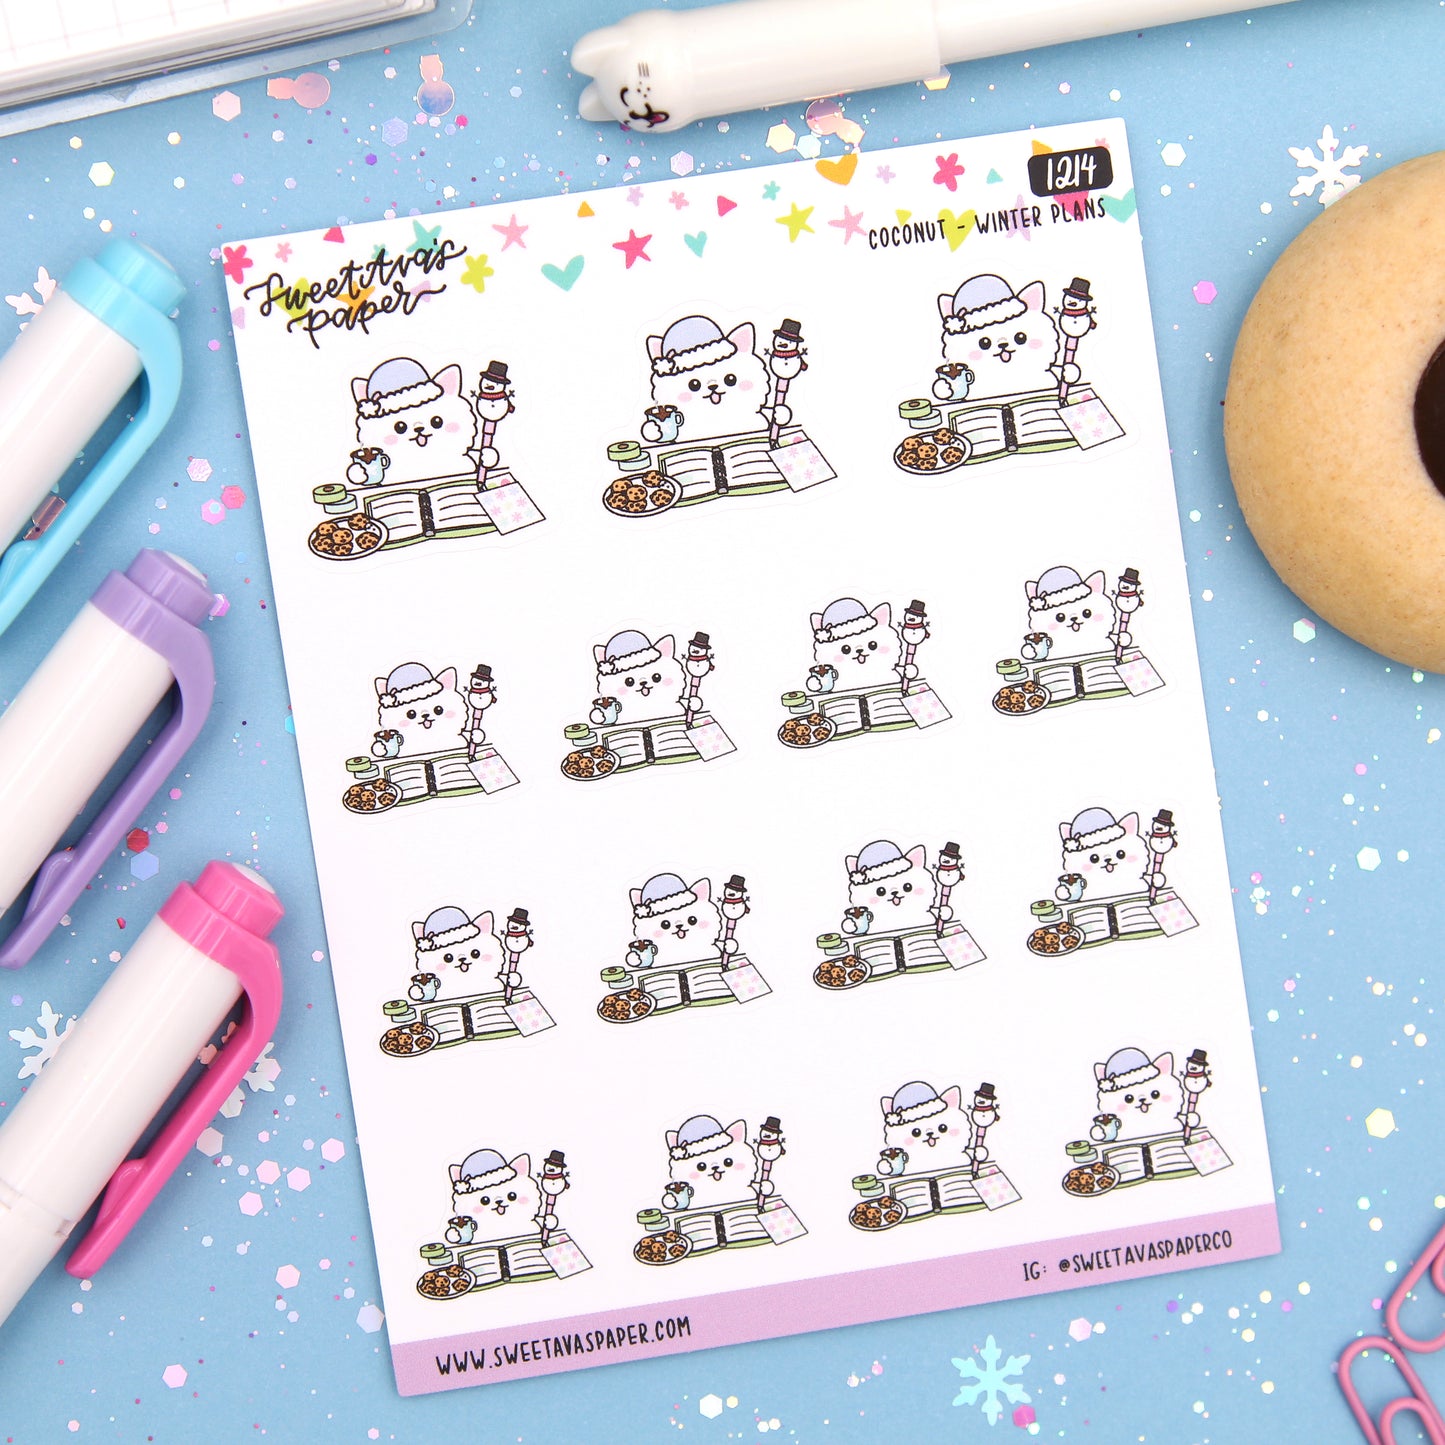 Winter Planning Planner Stickers - Coconut the Puppy [1214]